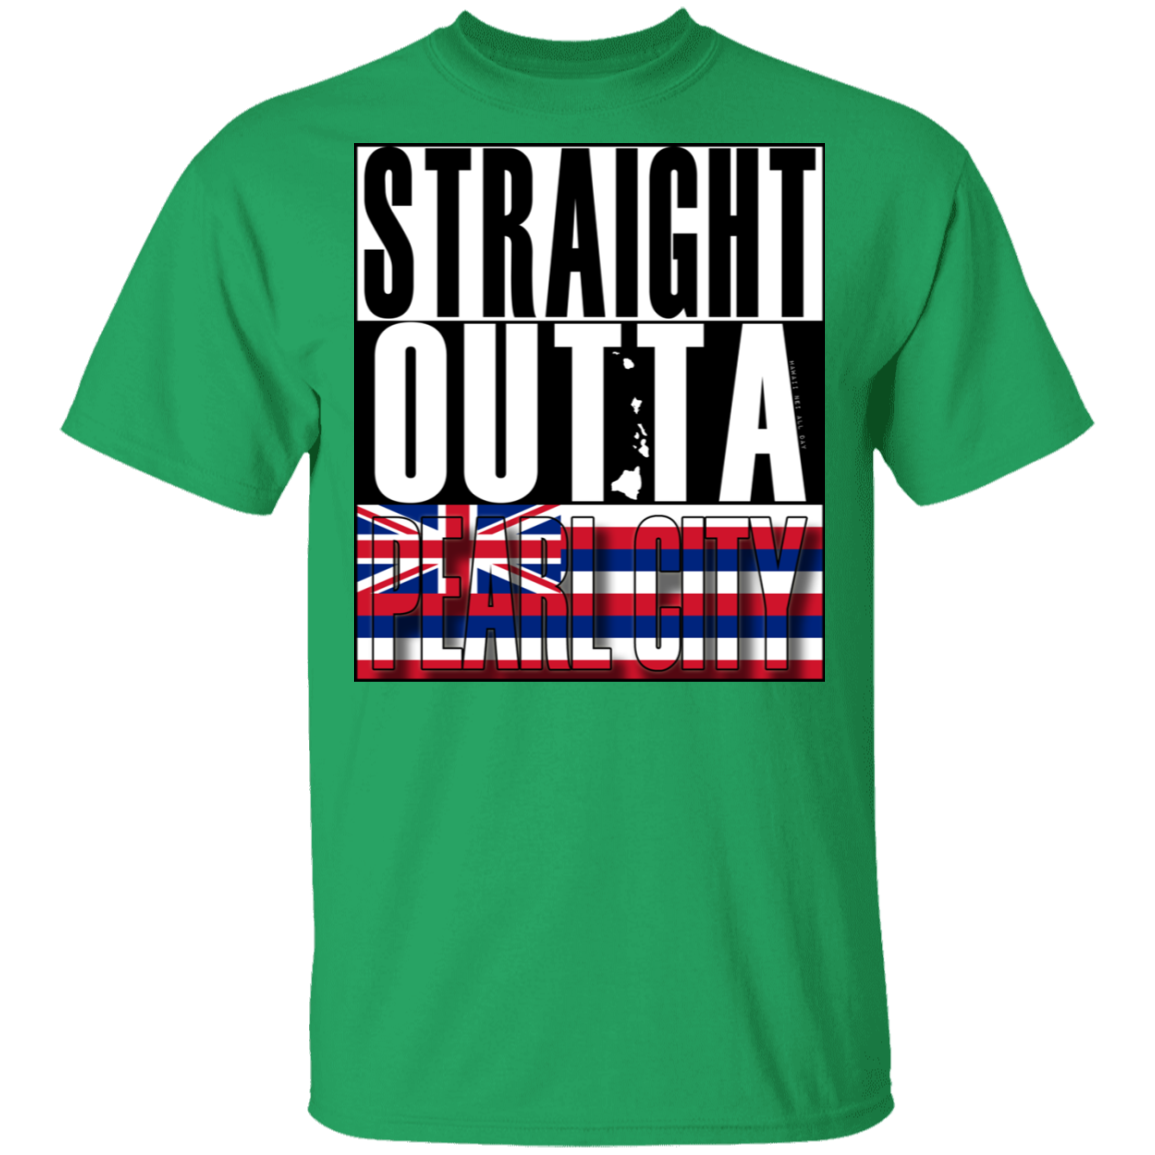 Straight Outta Pearl City T-Shirt, T-Shirts, Hawaii Nei All Day